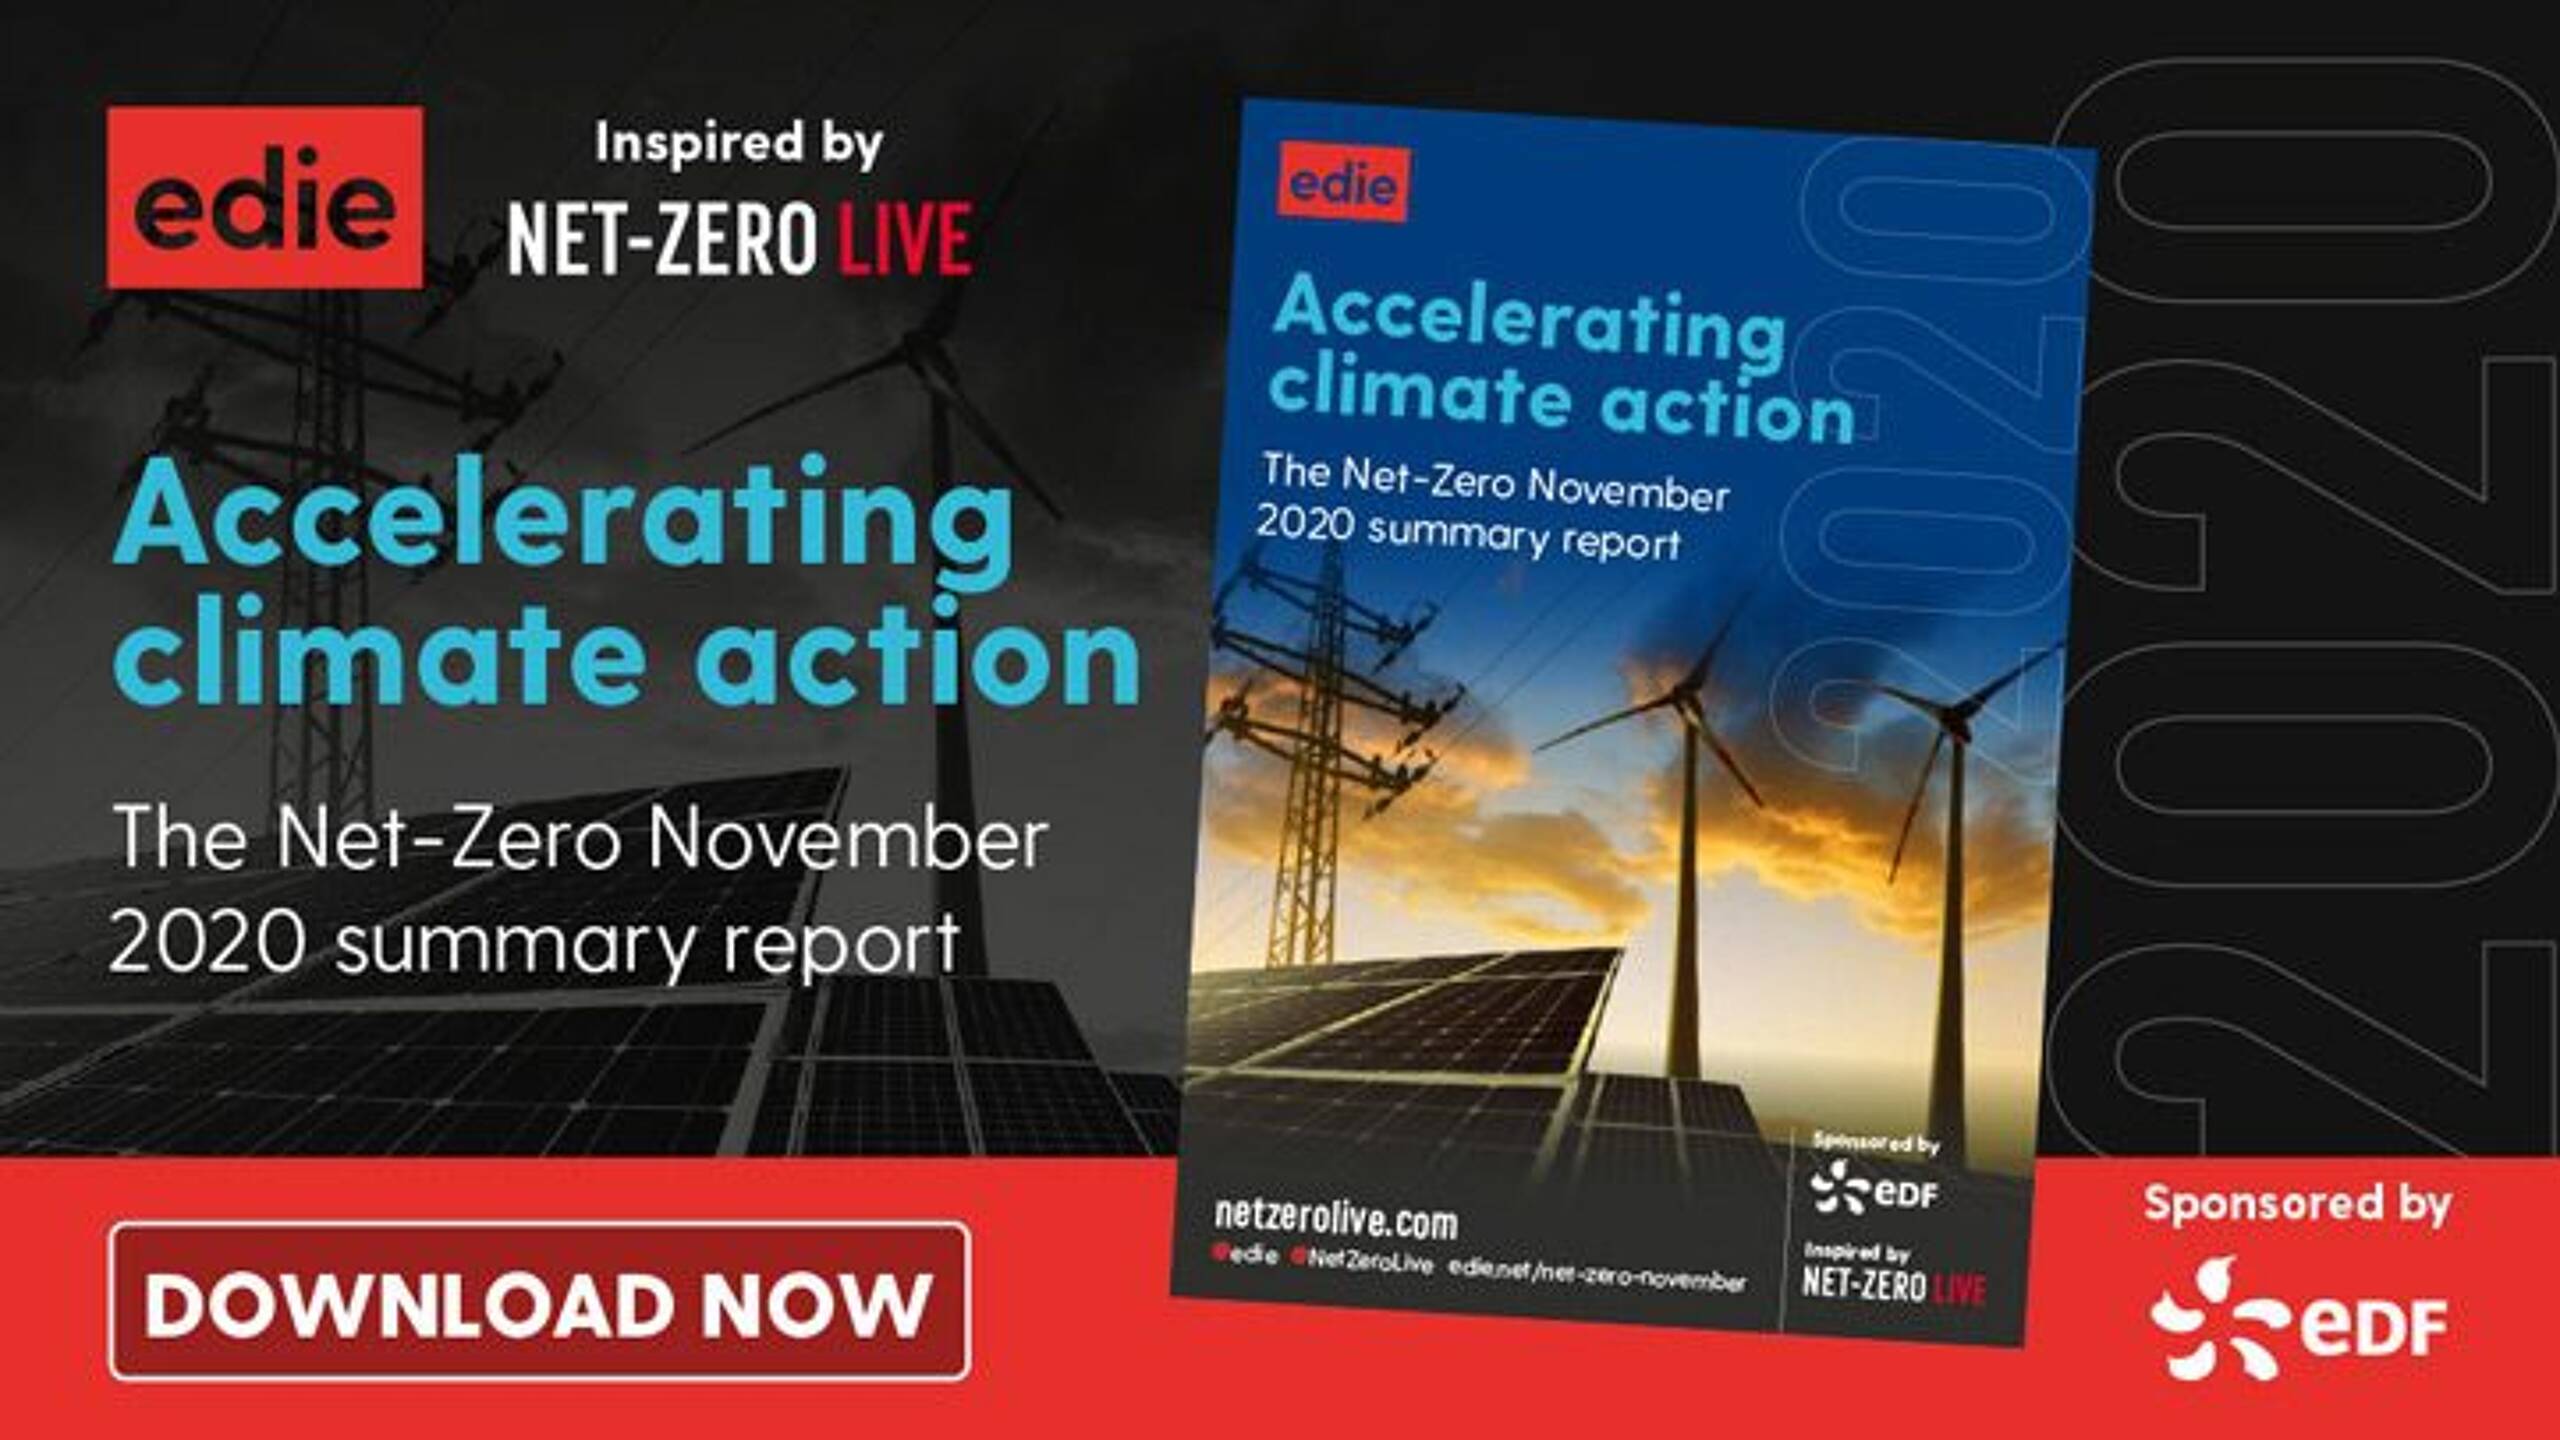 Accelerating climate action: edie publishes Net-Zero November round-up report